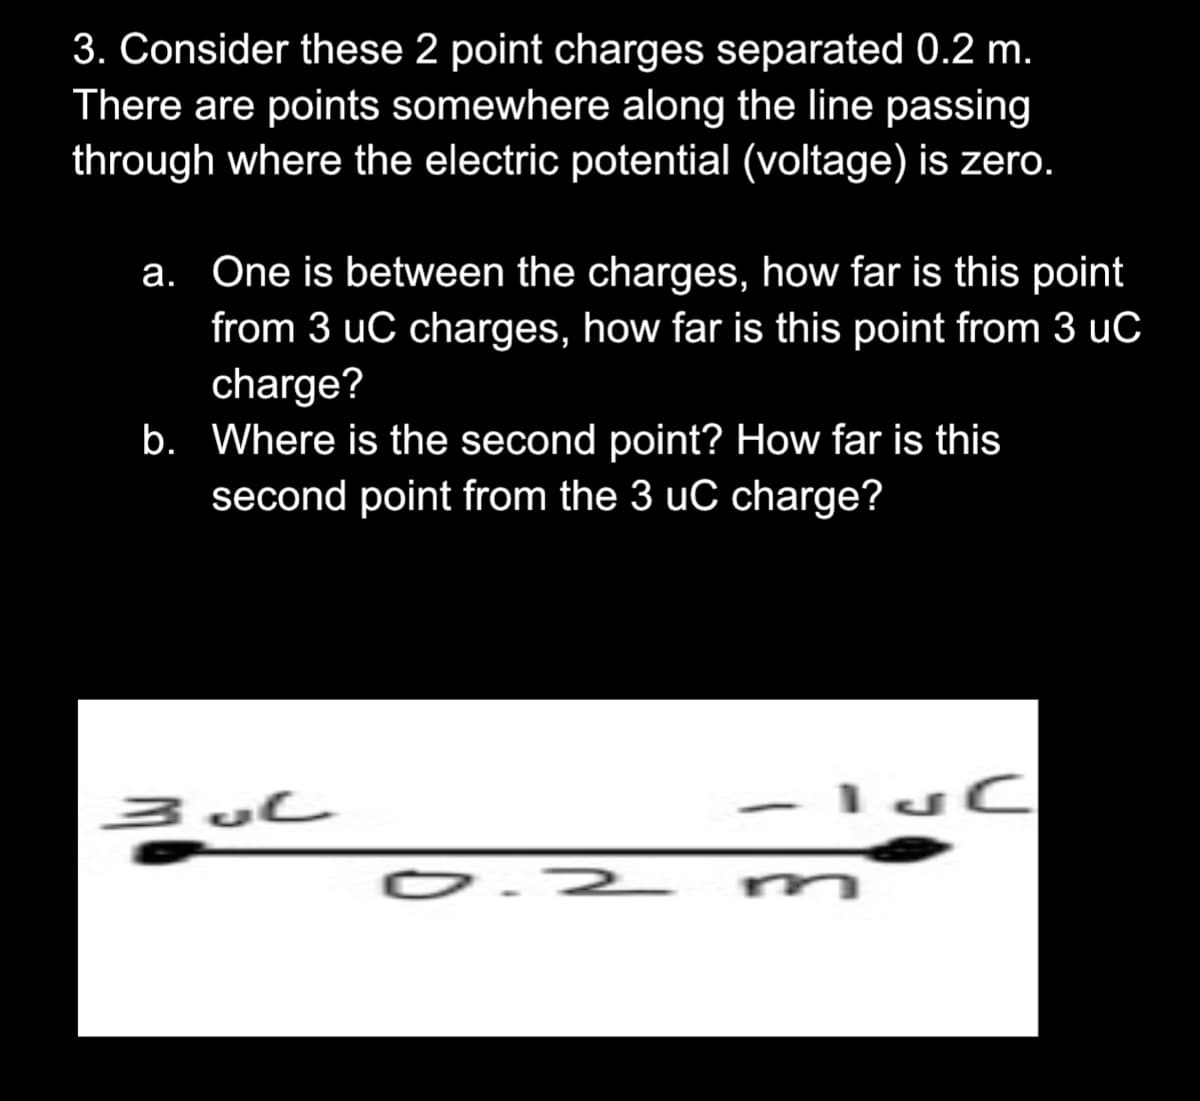 3. Consider these 2 point charges separated 0.2 m.
There are points somewhere along the line passing
through where the electric potential (voltage) is zero.
a. One is between the charges, how far is this point
from 3 uC charges, how far is this point from 3 uC
charge?
b. Where is the second point? How far is this
second point from the 3 uC charge?
O.2
